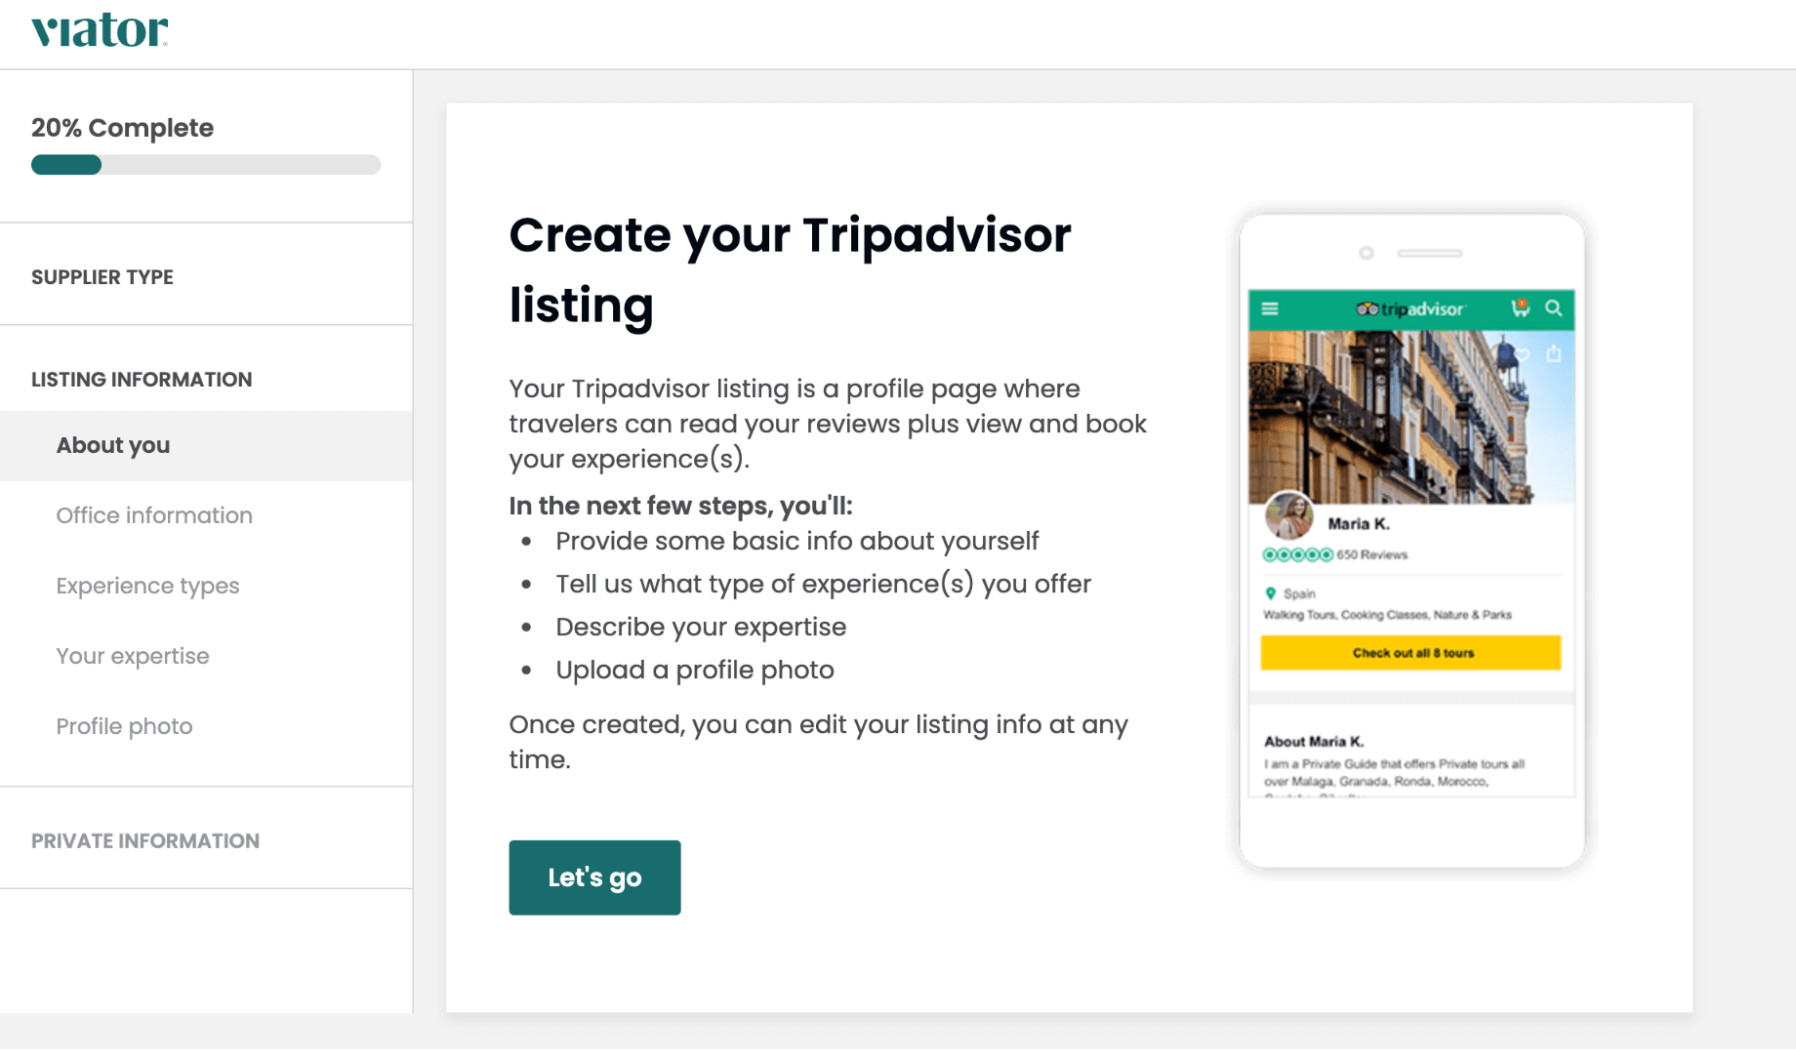 Create your Tripadvisor listing: Your Tripadvisor listing is a profile page where travelers can read your reviews plus view and book your experiences.